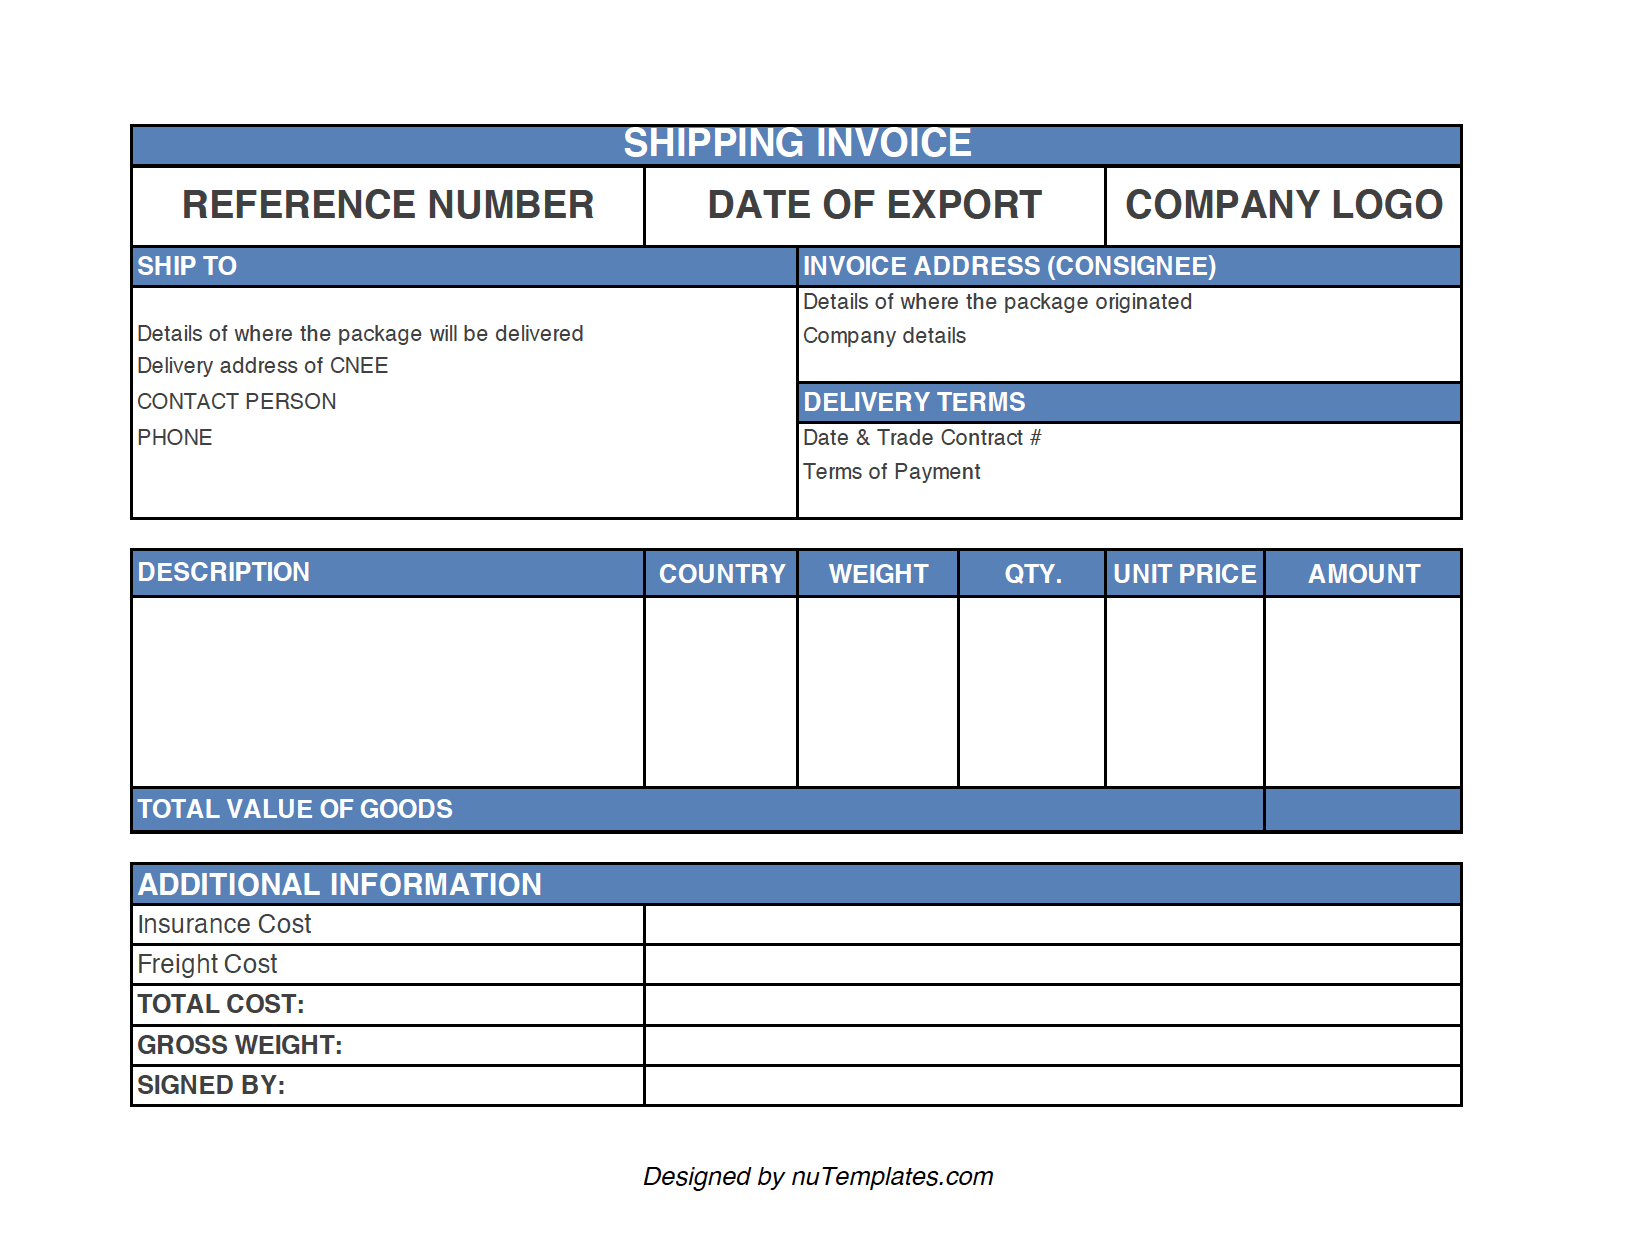 Shipping Invoice Template Shipping Invoices nuTemplates